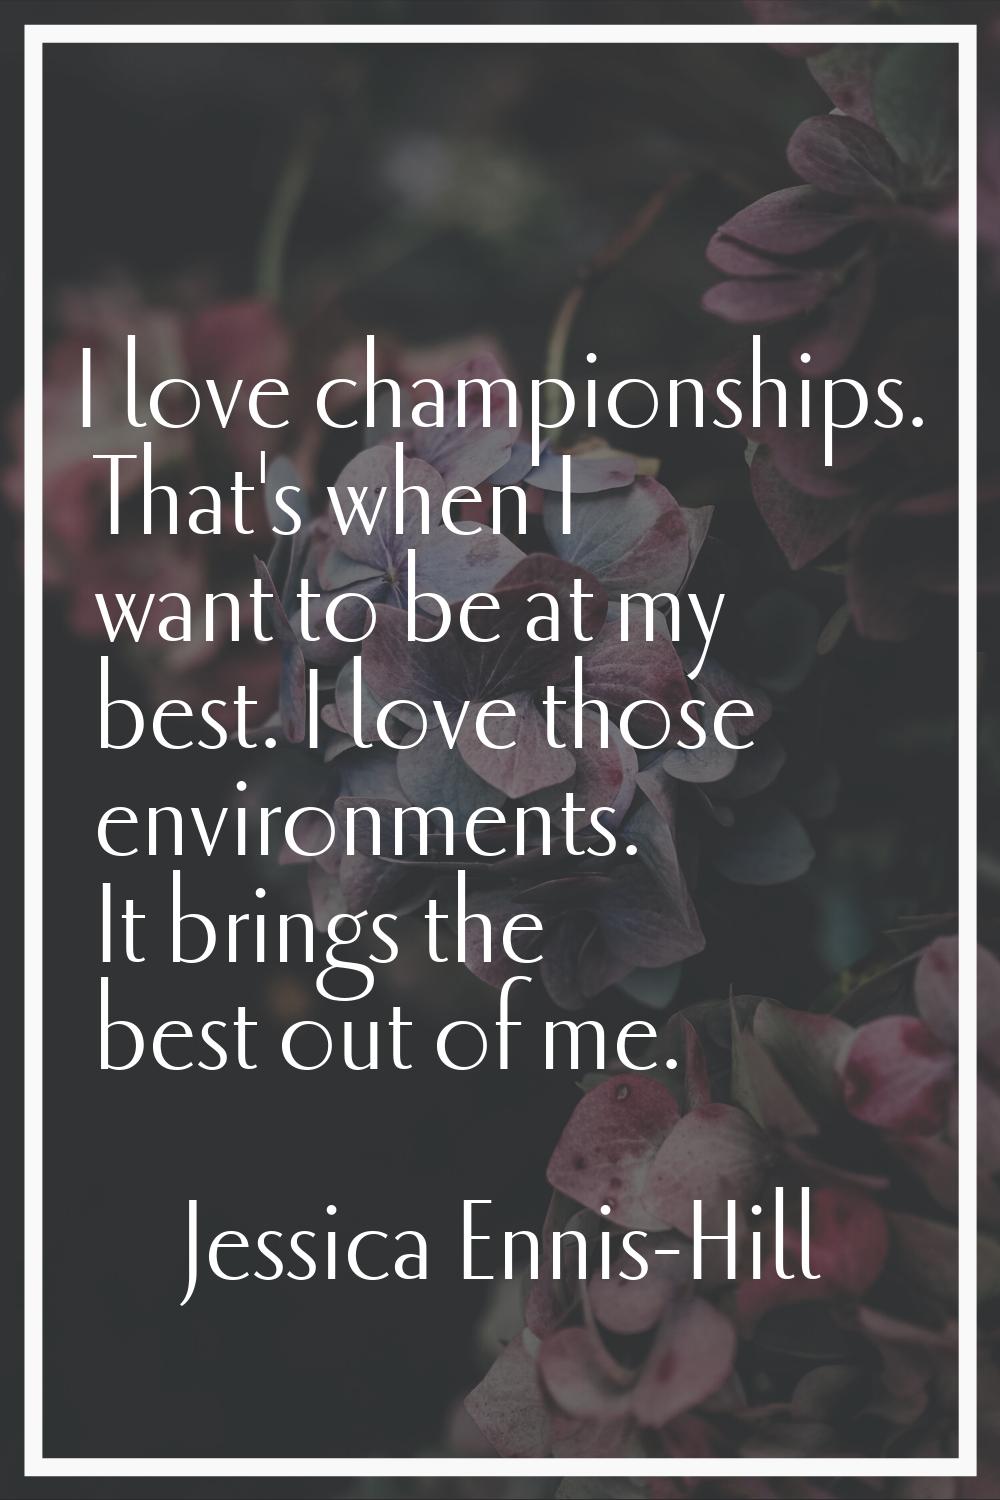 I love championships. That's when I want to be at my best. I love those environments. It brings the